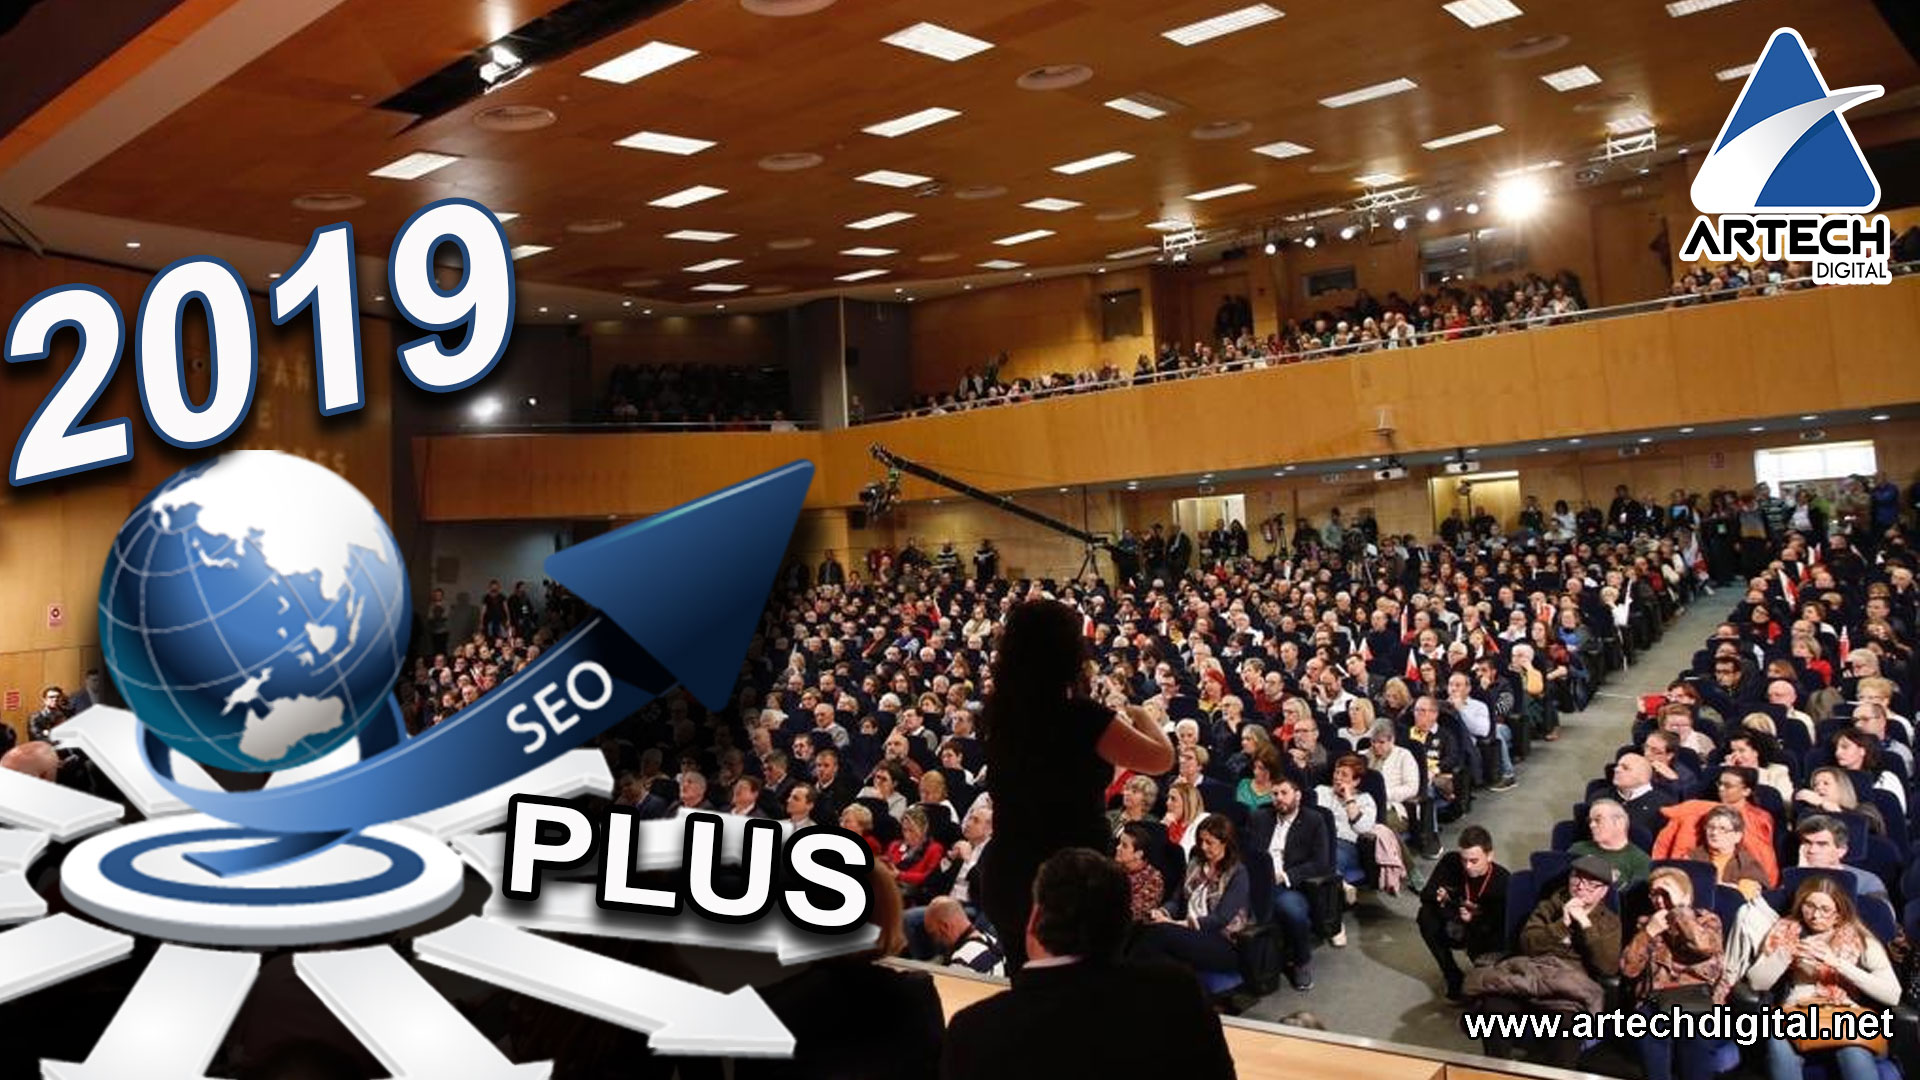 SEO Plus 2019, “The biggest event of the year in Spain”